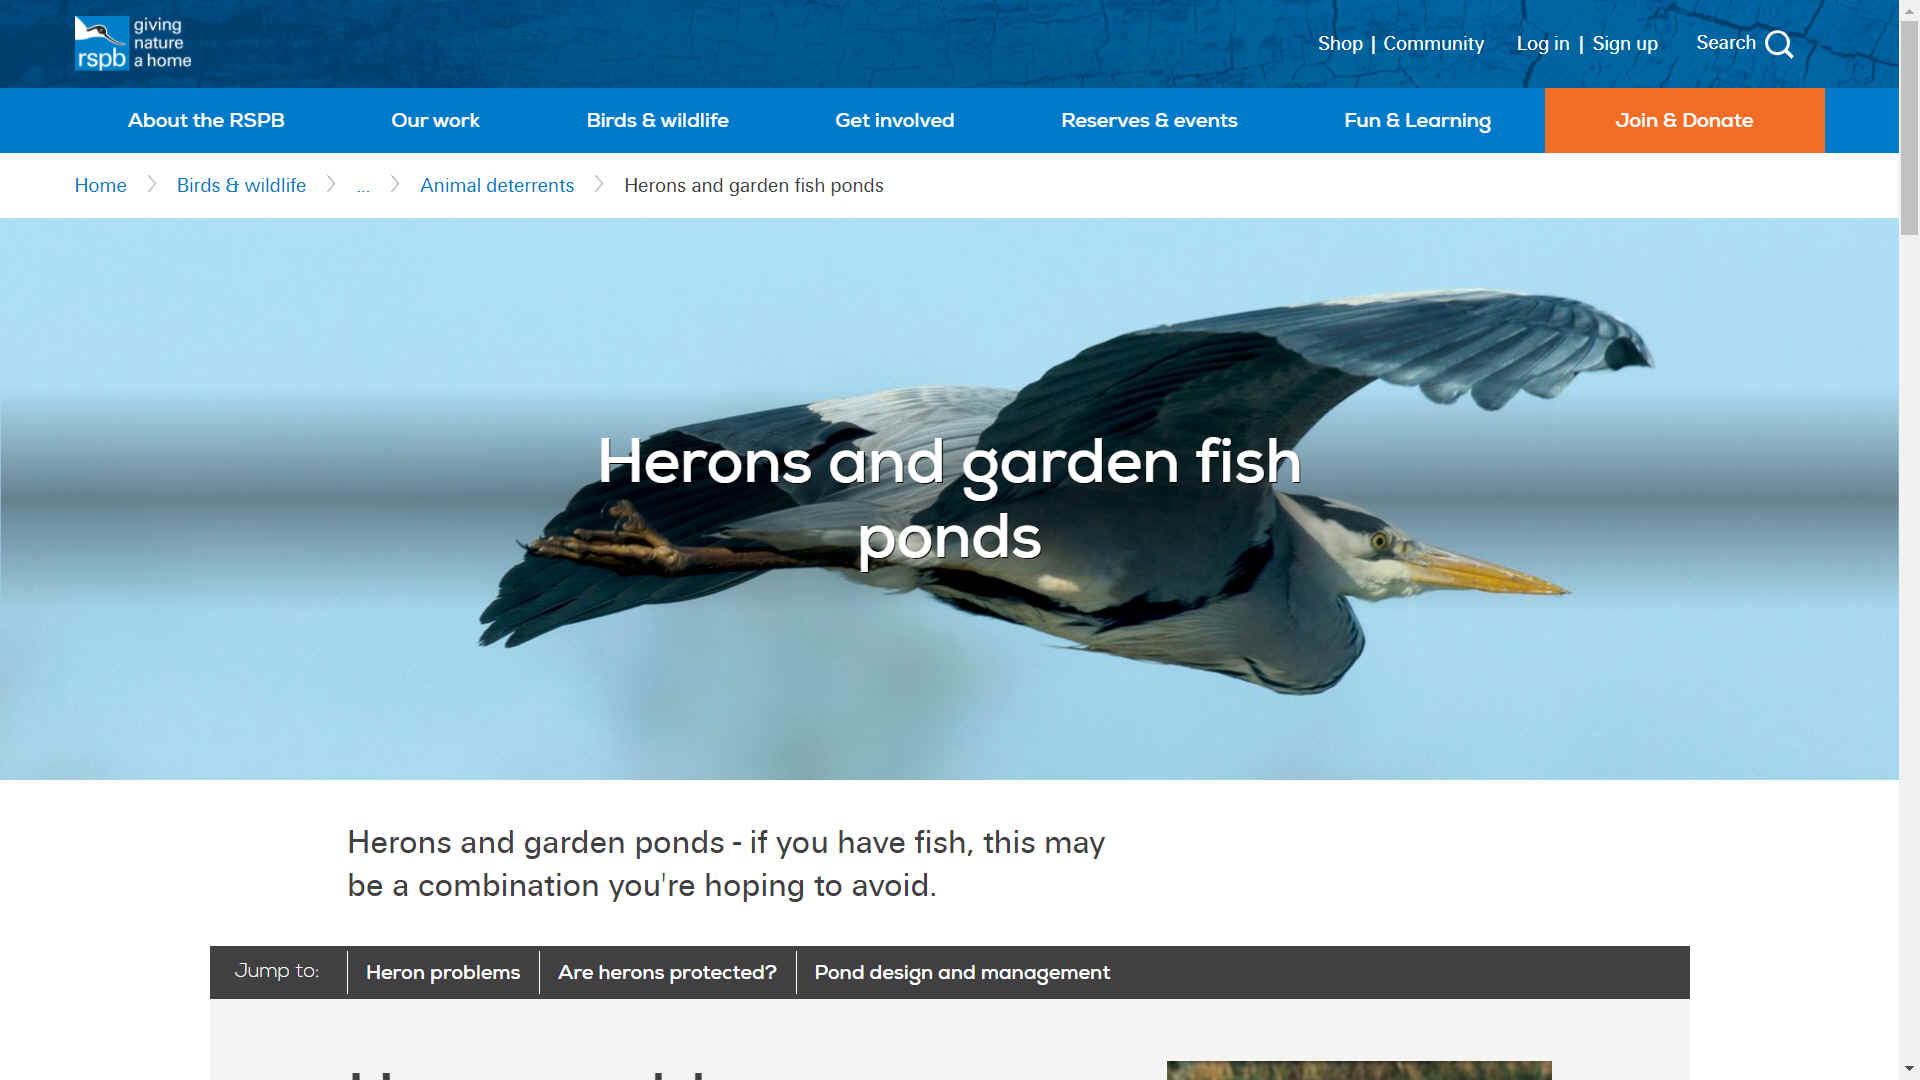 Royal Society for the Protection of Birds - RSPB